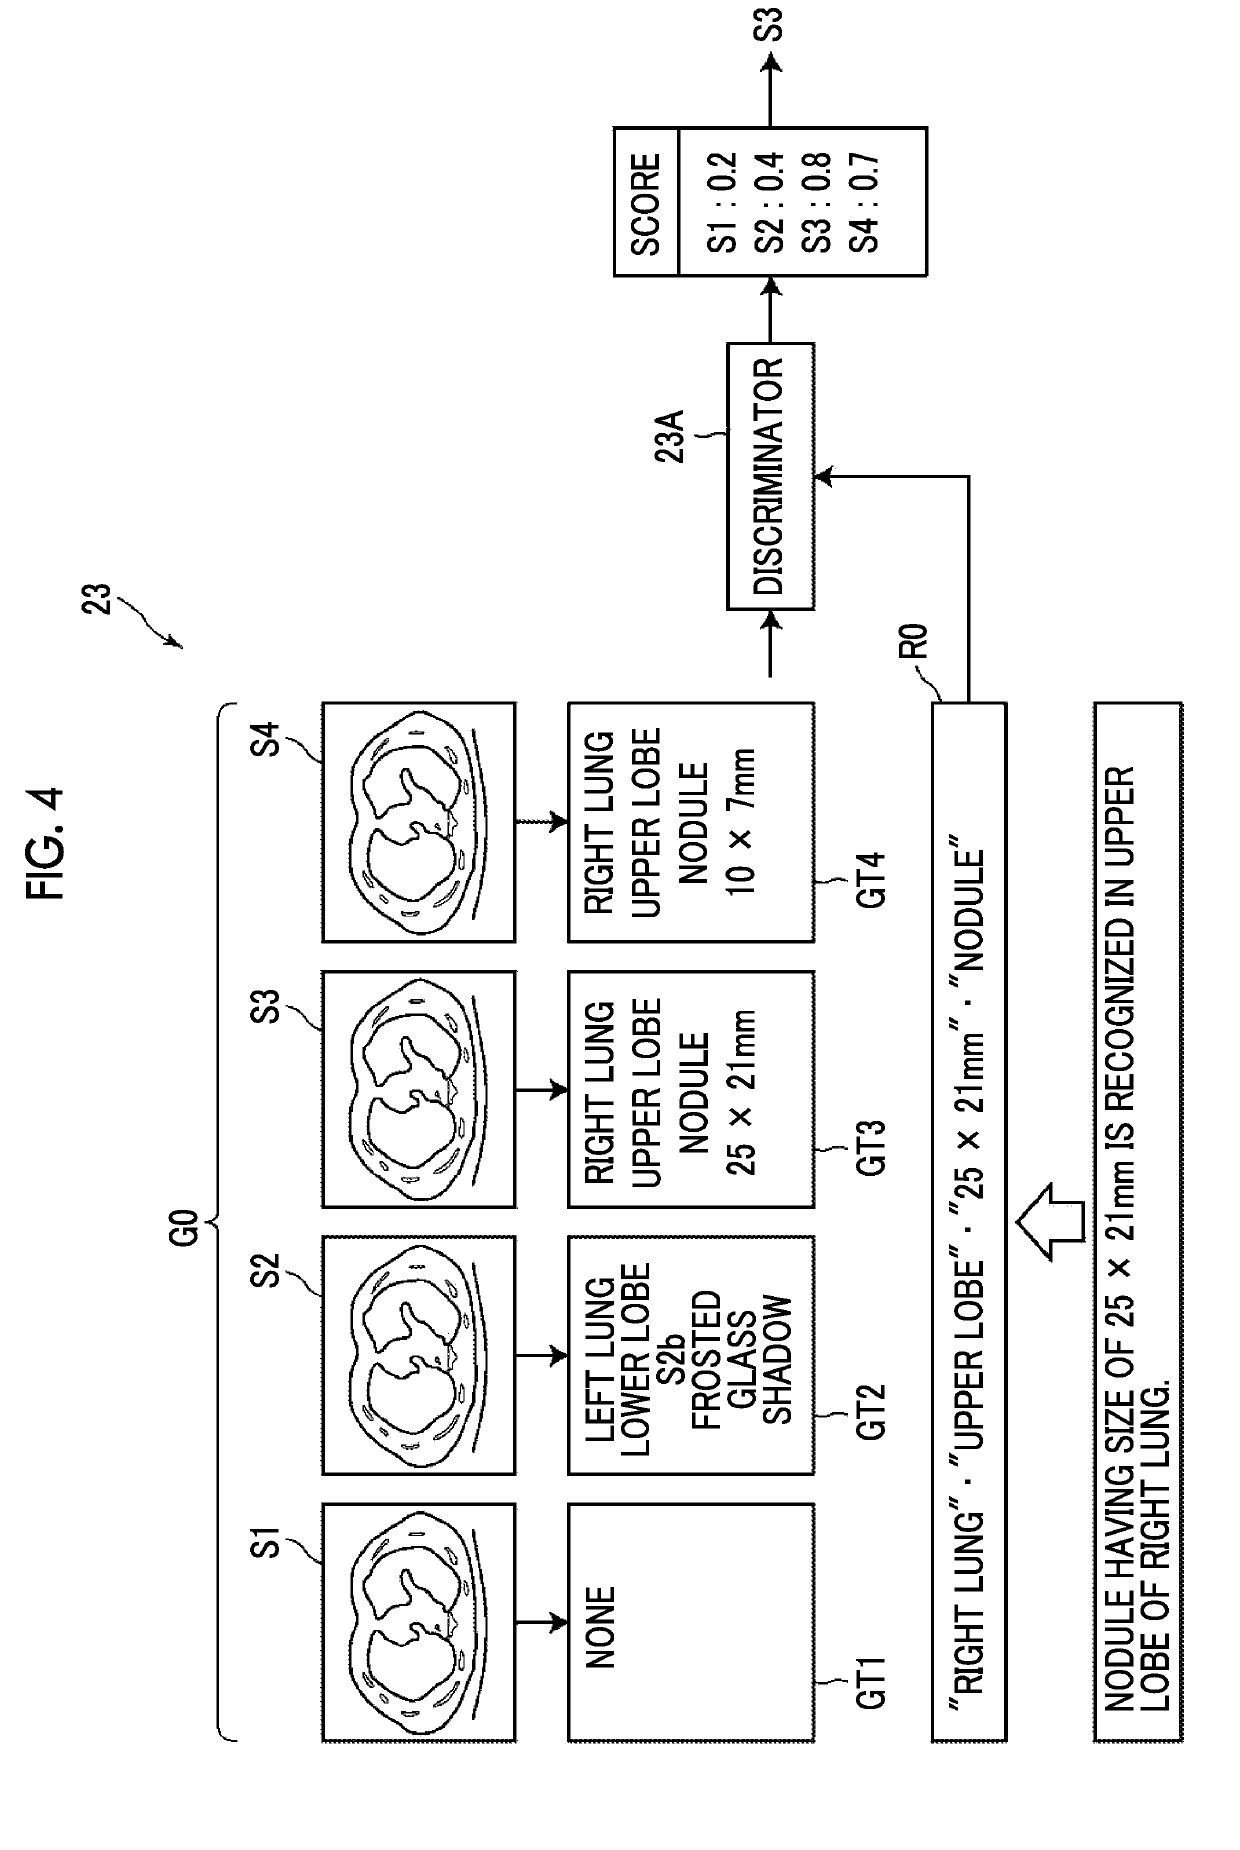 Medical image specifying apparatus, method, and program